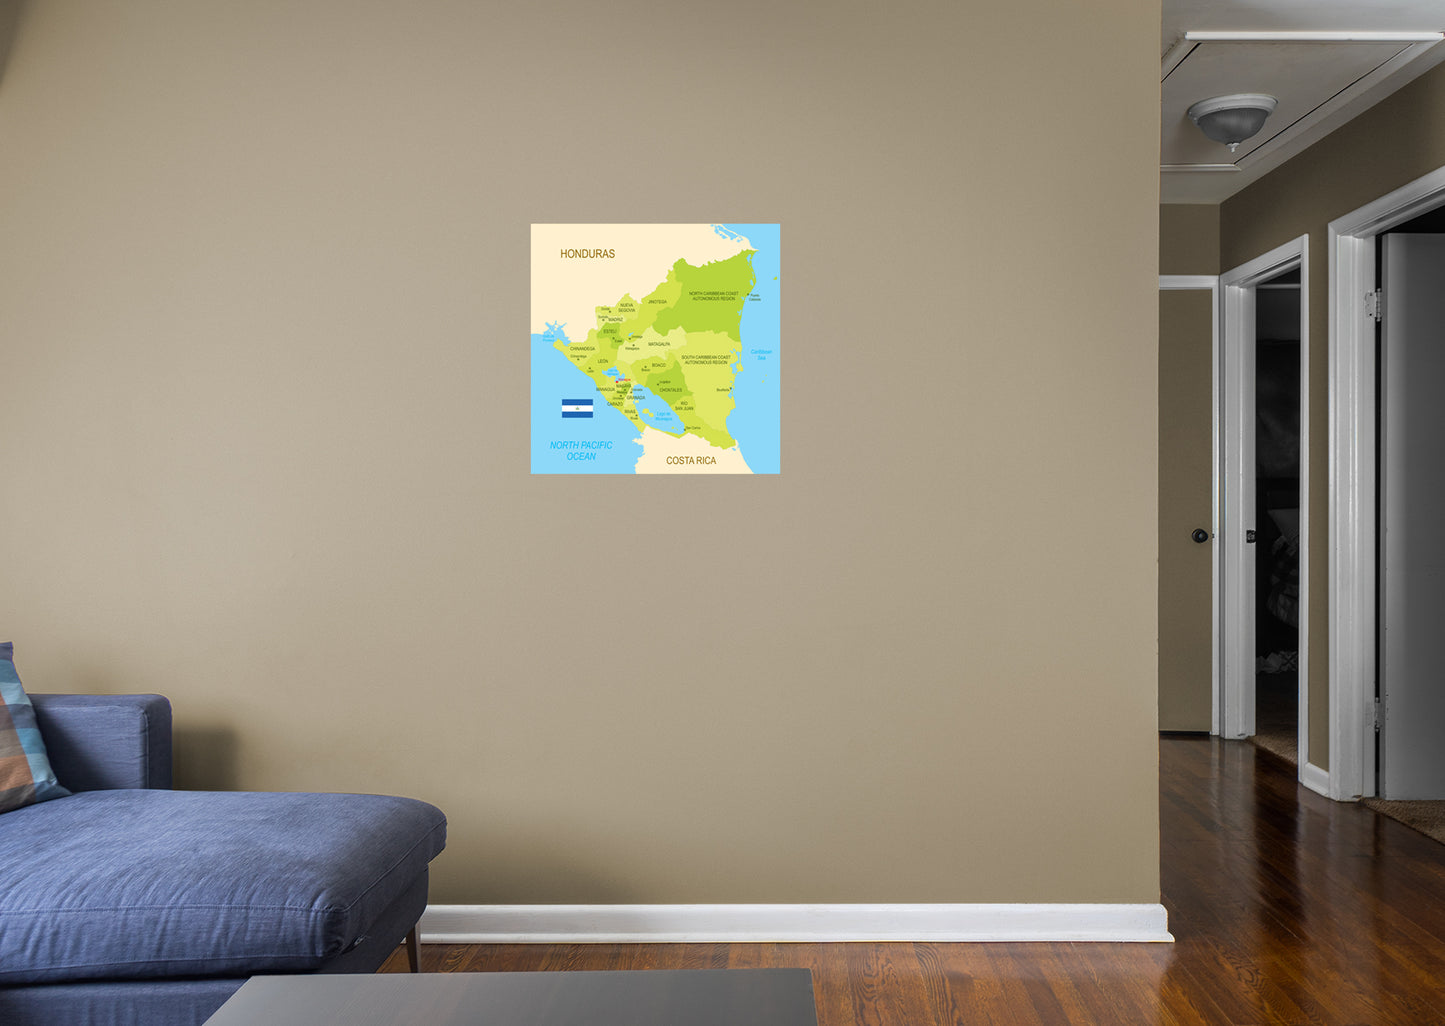 Maps of North America: Nicaragua Mural        -   Removable Wall   Adhesive Decal